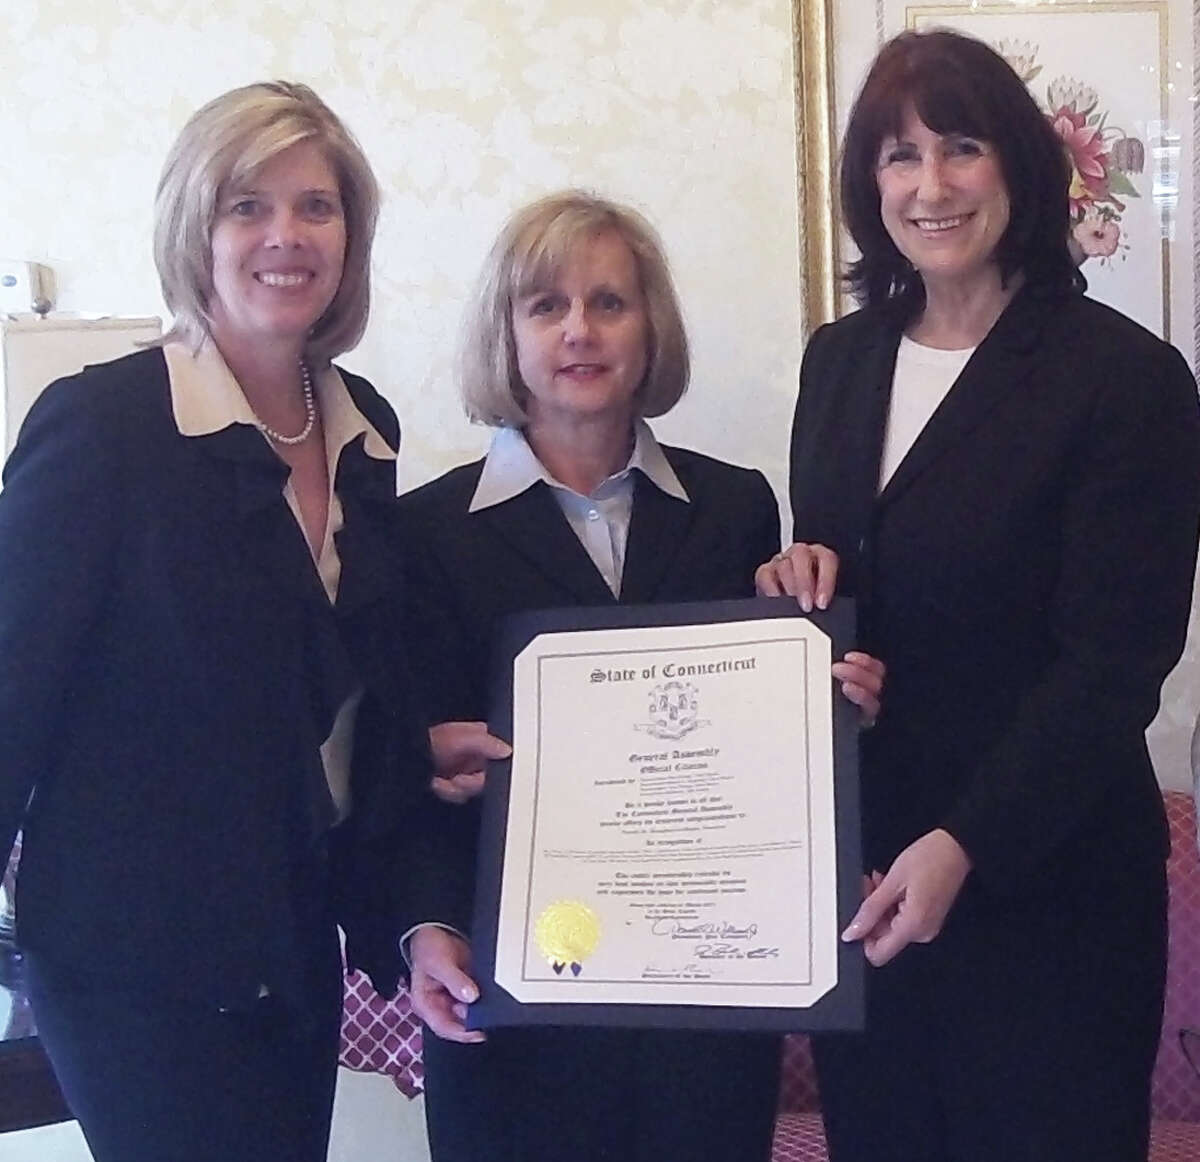 Funeral home owner Pamala Shaughnessey-Banks is presented the Womenís Economic Spotlight Recognition Award by state Rep. Kim Fawcett, left, and Beverly Balaz, executive director of the fairfield Chamber of Commerce. The award, given periodically, aims to spotlight successful business women in town.